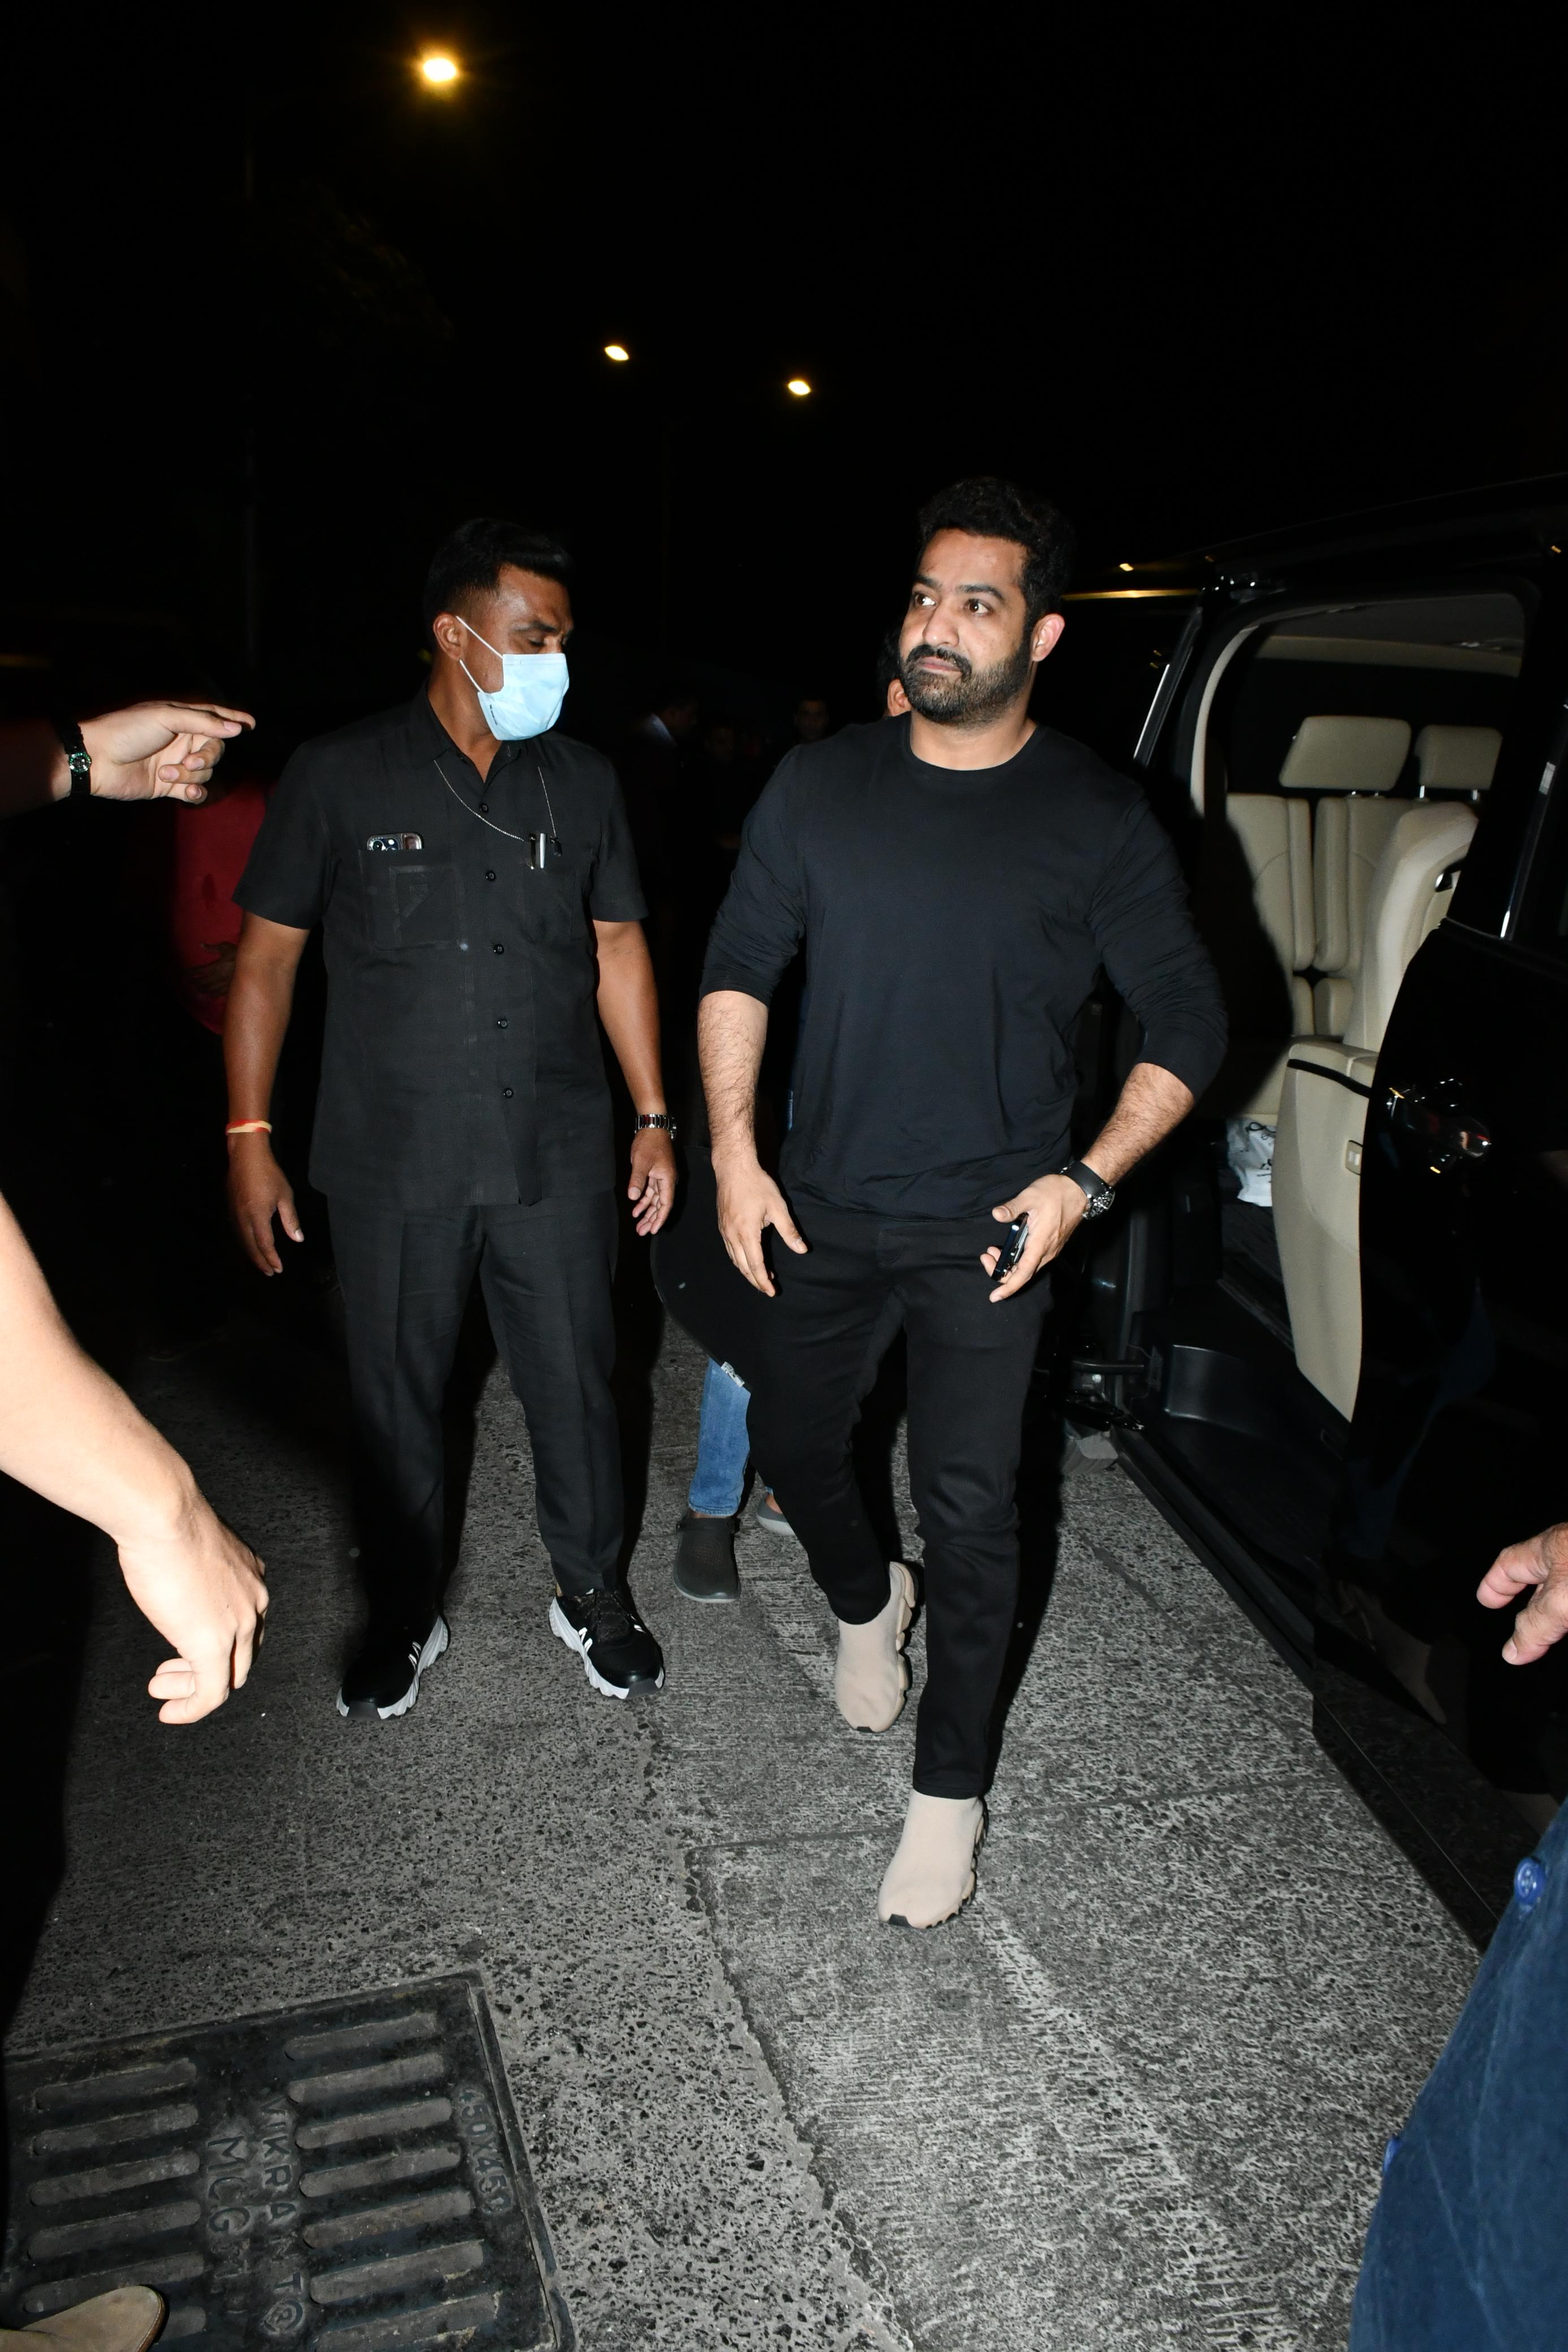 Just like Ranbir Jr NTR also wore black on black outfit to ace his look at dinner party